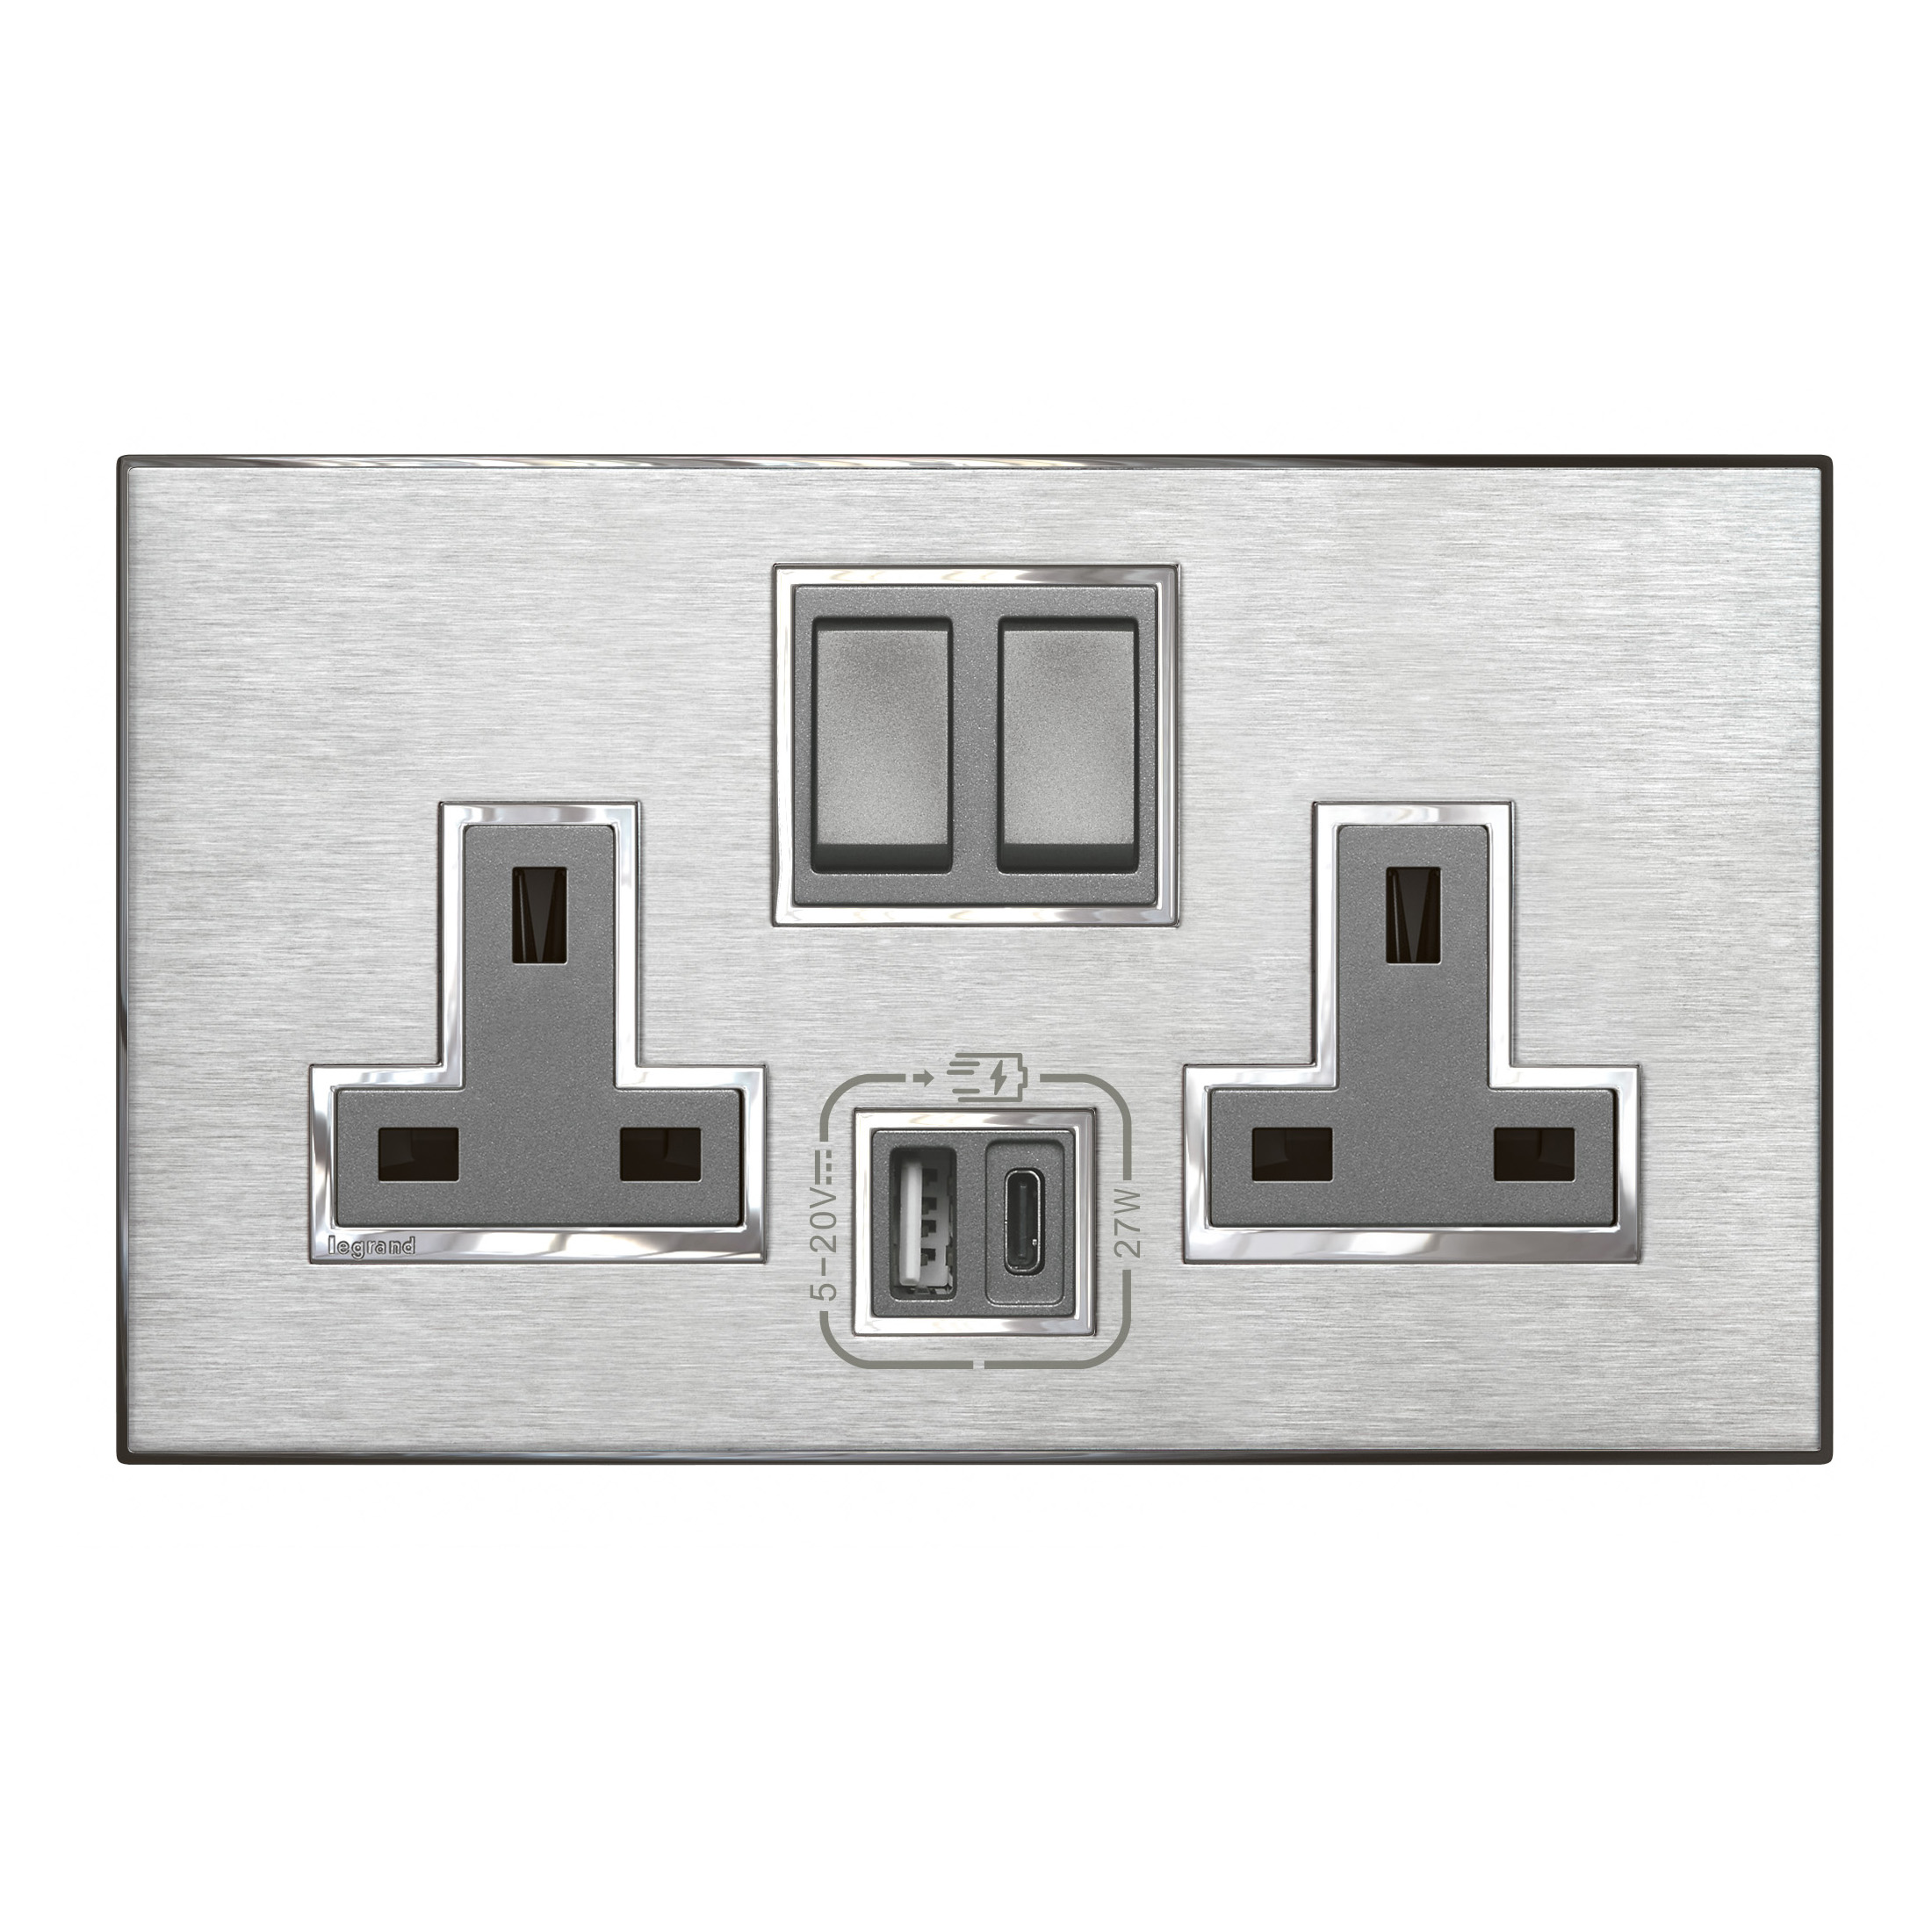 Arteor 2 gang single pole switched outlets - with USB A+C 27W charger, 572807, 3414972511056